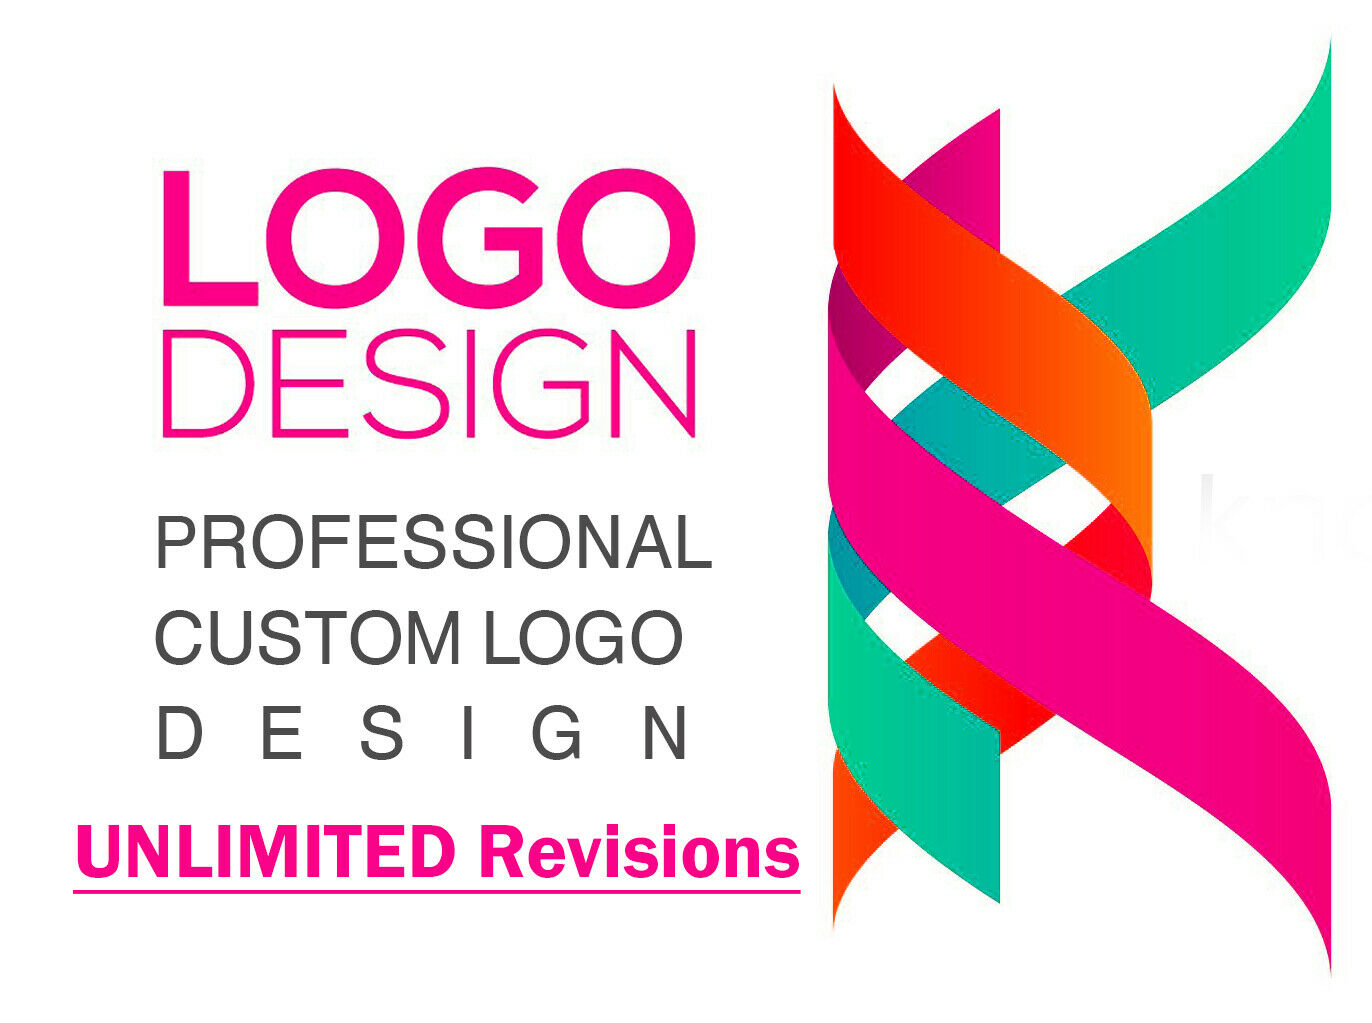 Logo Design (professional) For Your Business